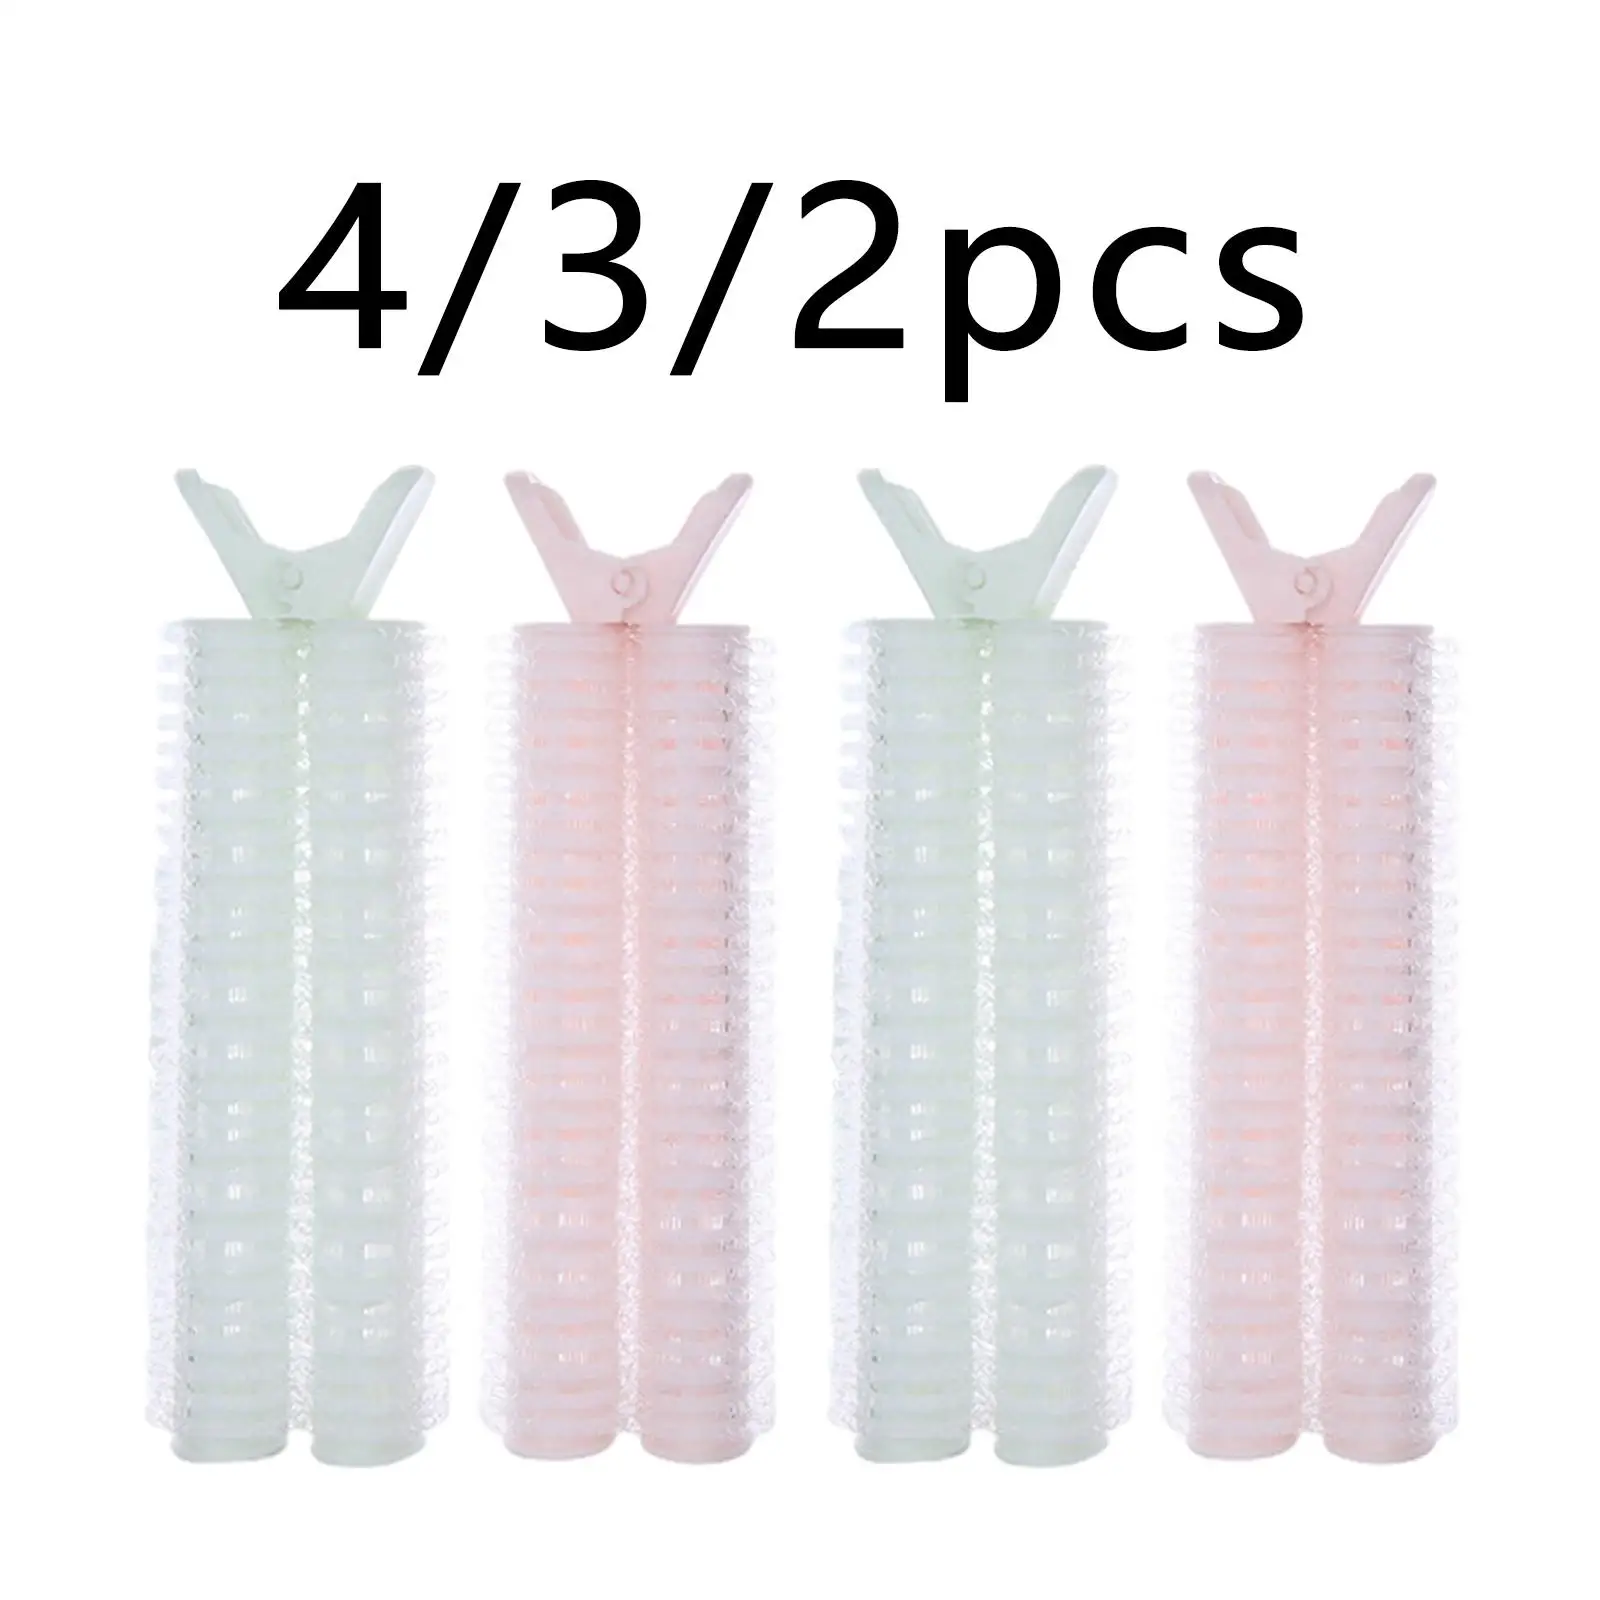 Hair Roots Clips, Nylon Duckbill Shape Natural Plastic Barrettes Styling Tool for Hair Styling Travel Vocation ,